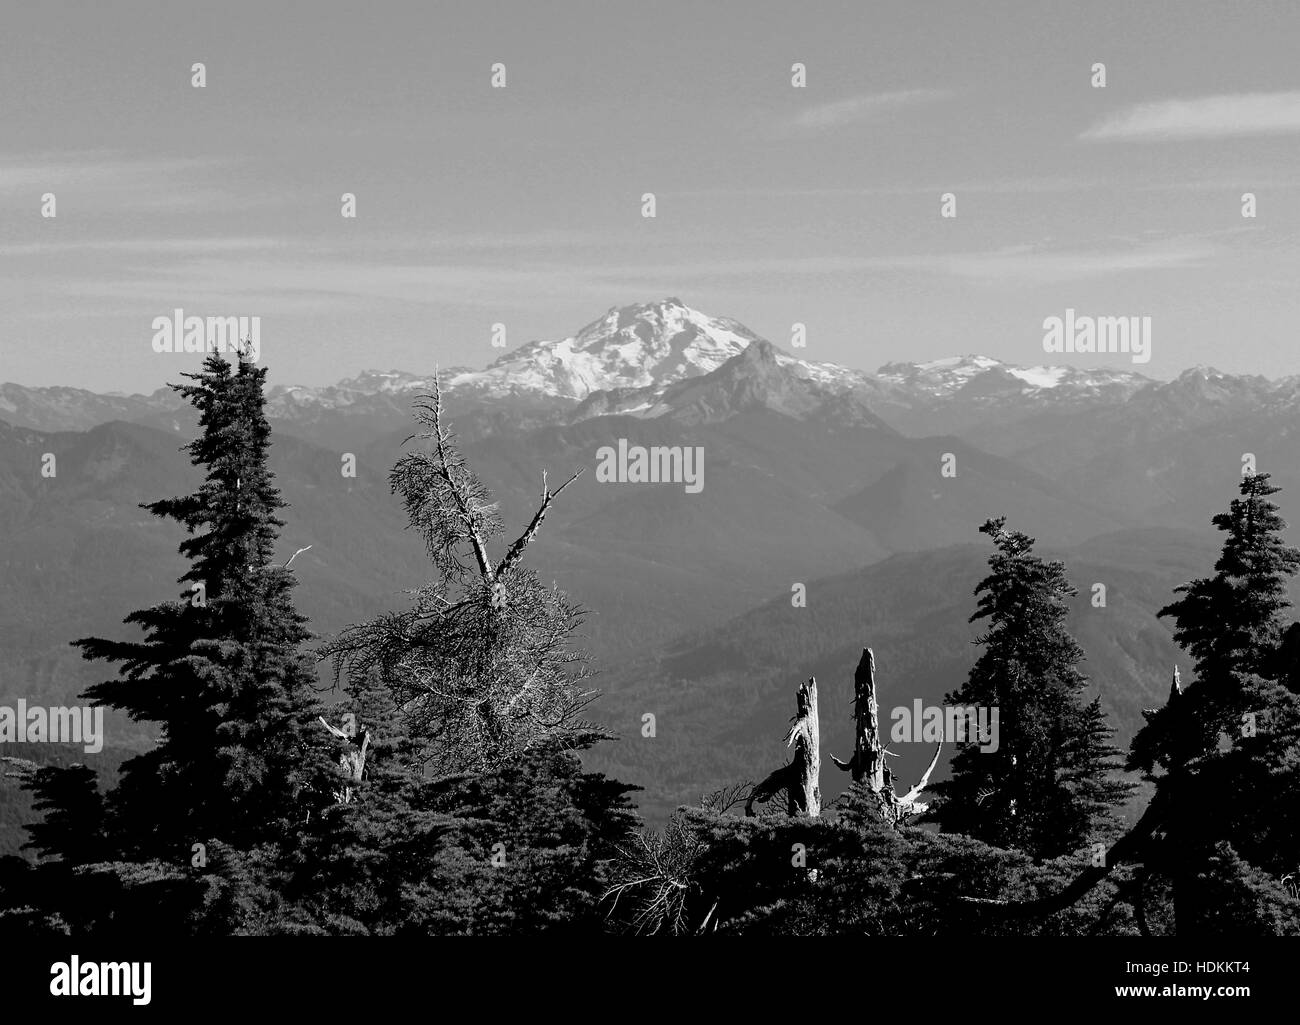 A view of Glacier Peak in the Mount Baker-Snoqualmie National Forest. Stock Photo